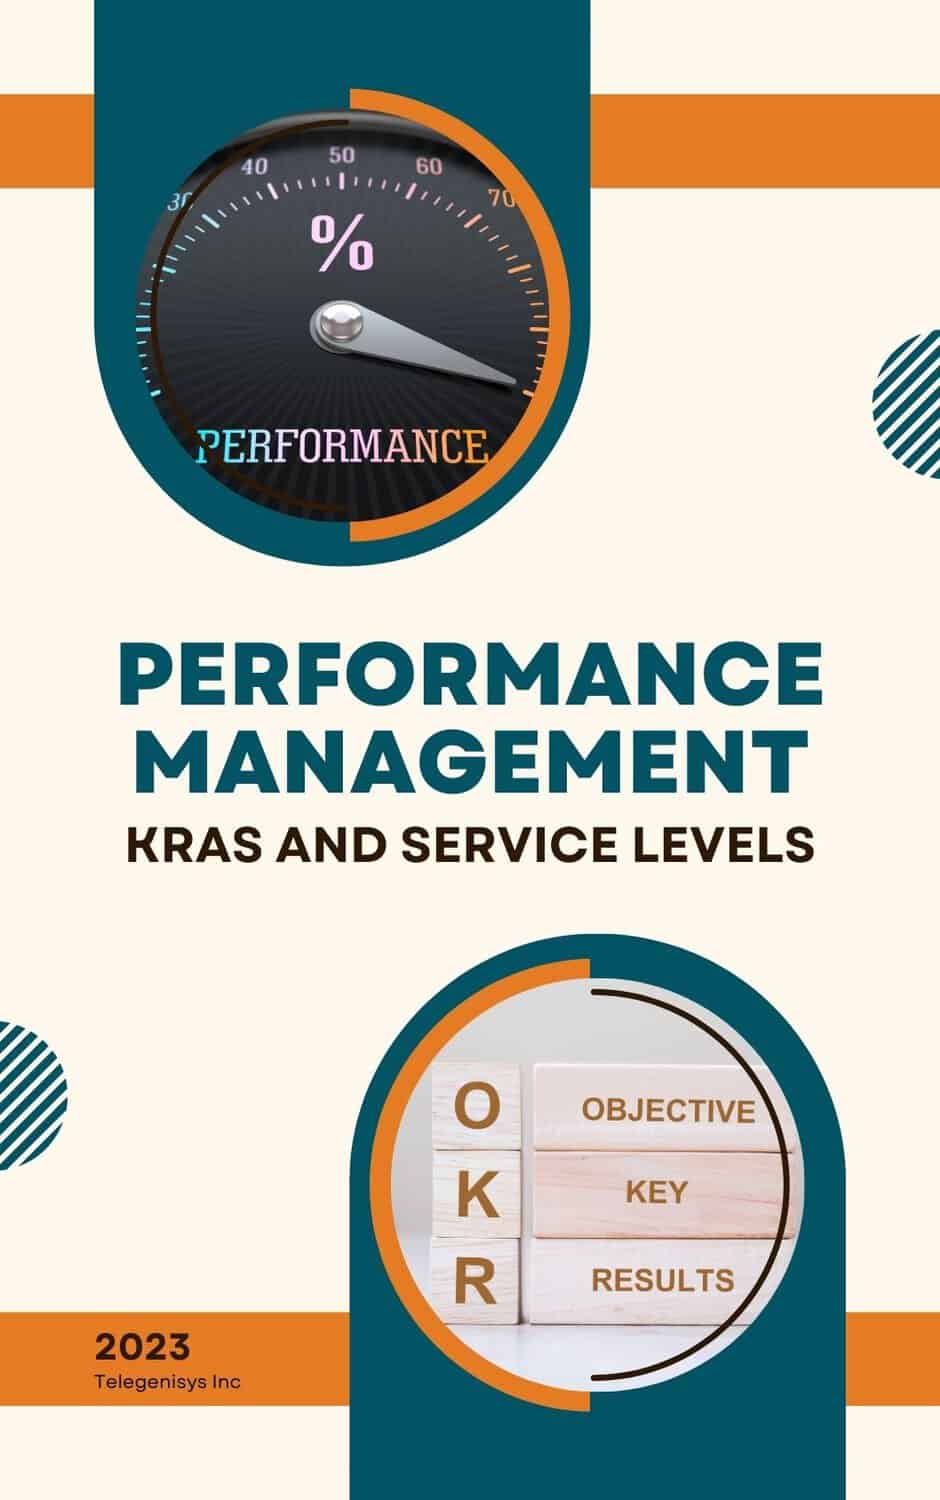 Outsourcing - Performance management (KRAs and Service Levels)